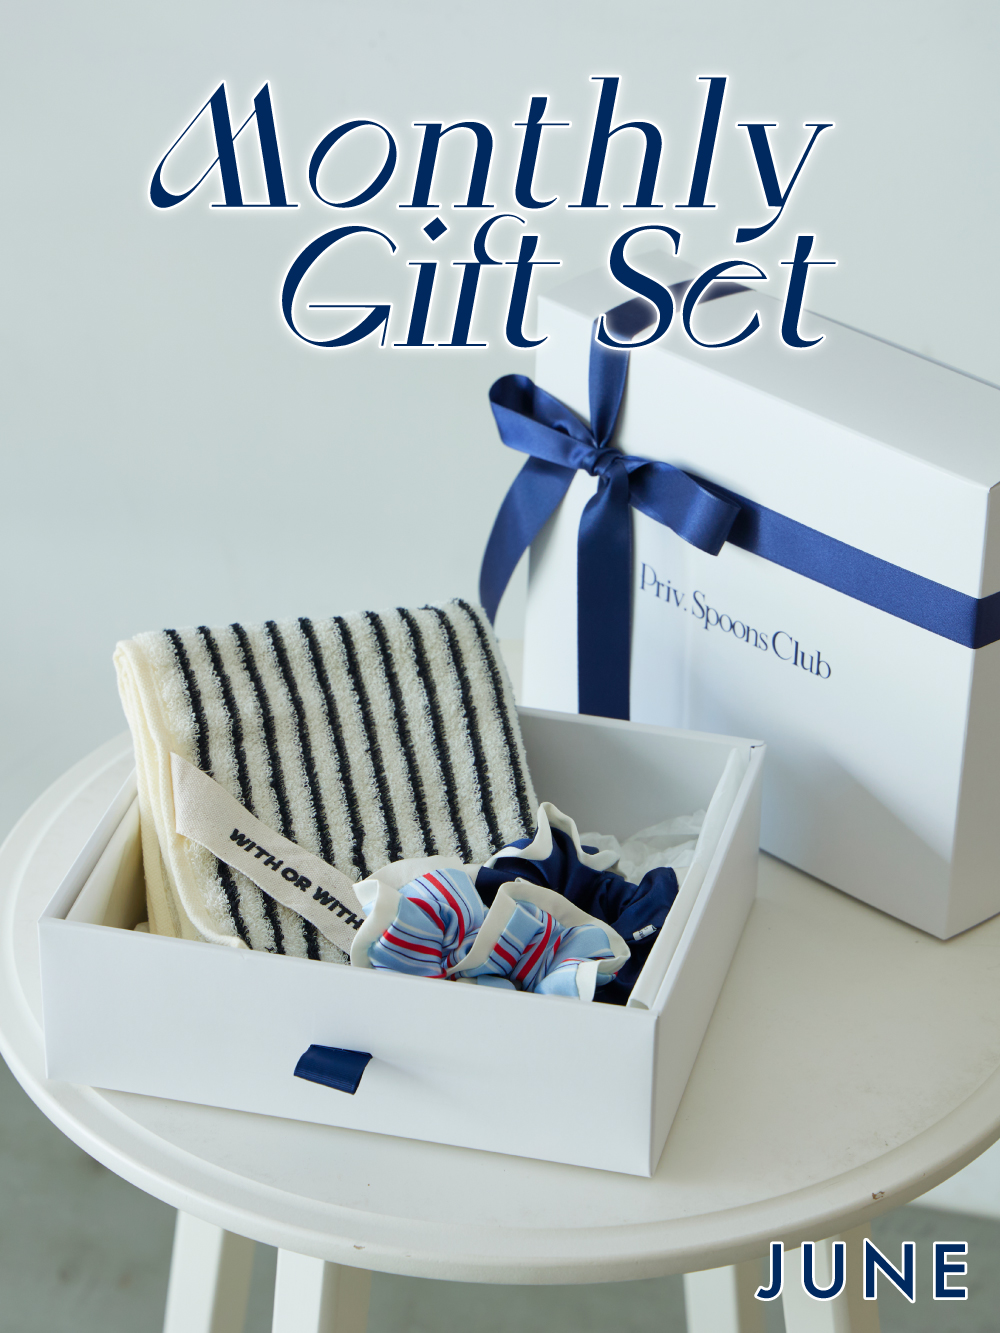 Monthly gift set - JUNE -